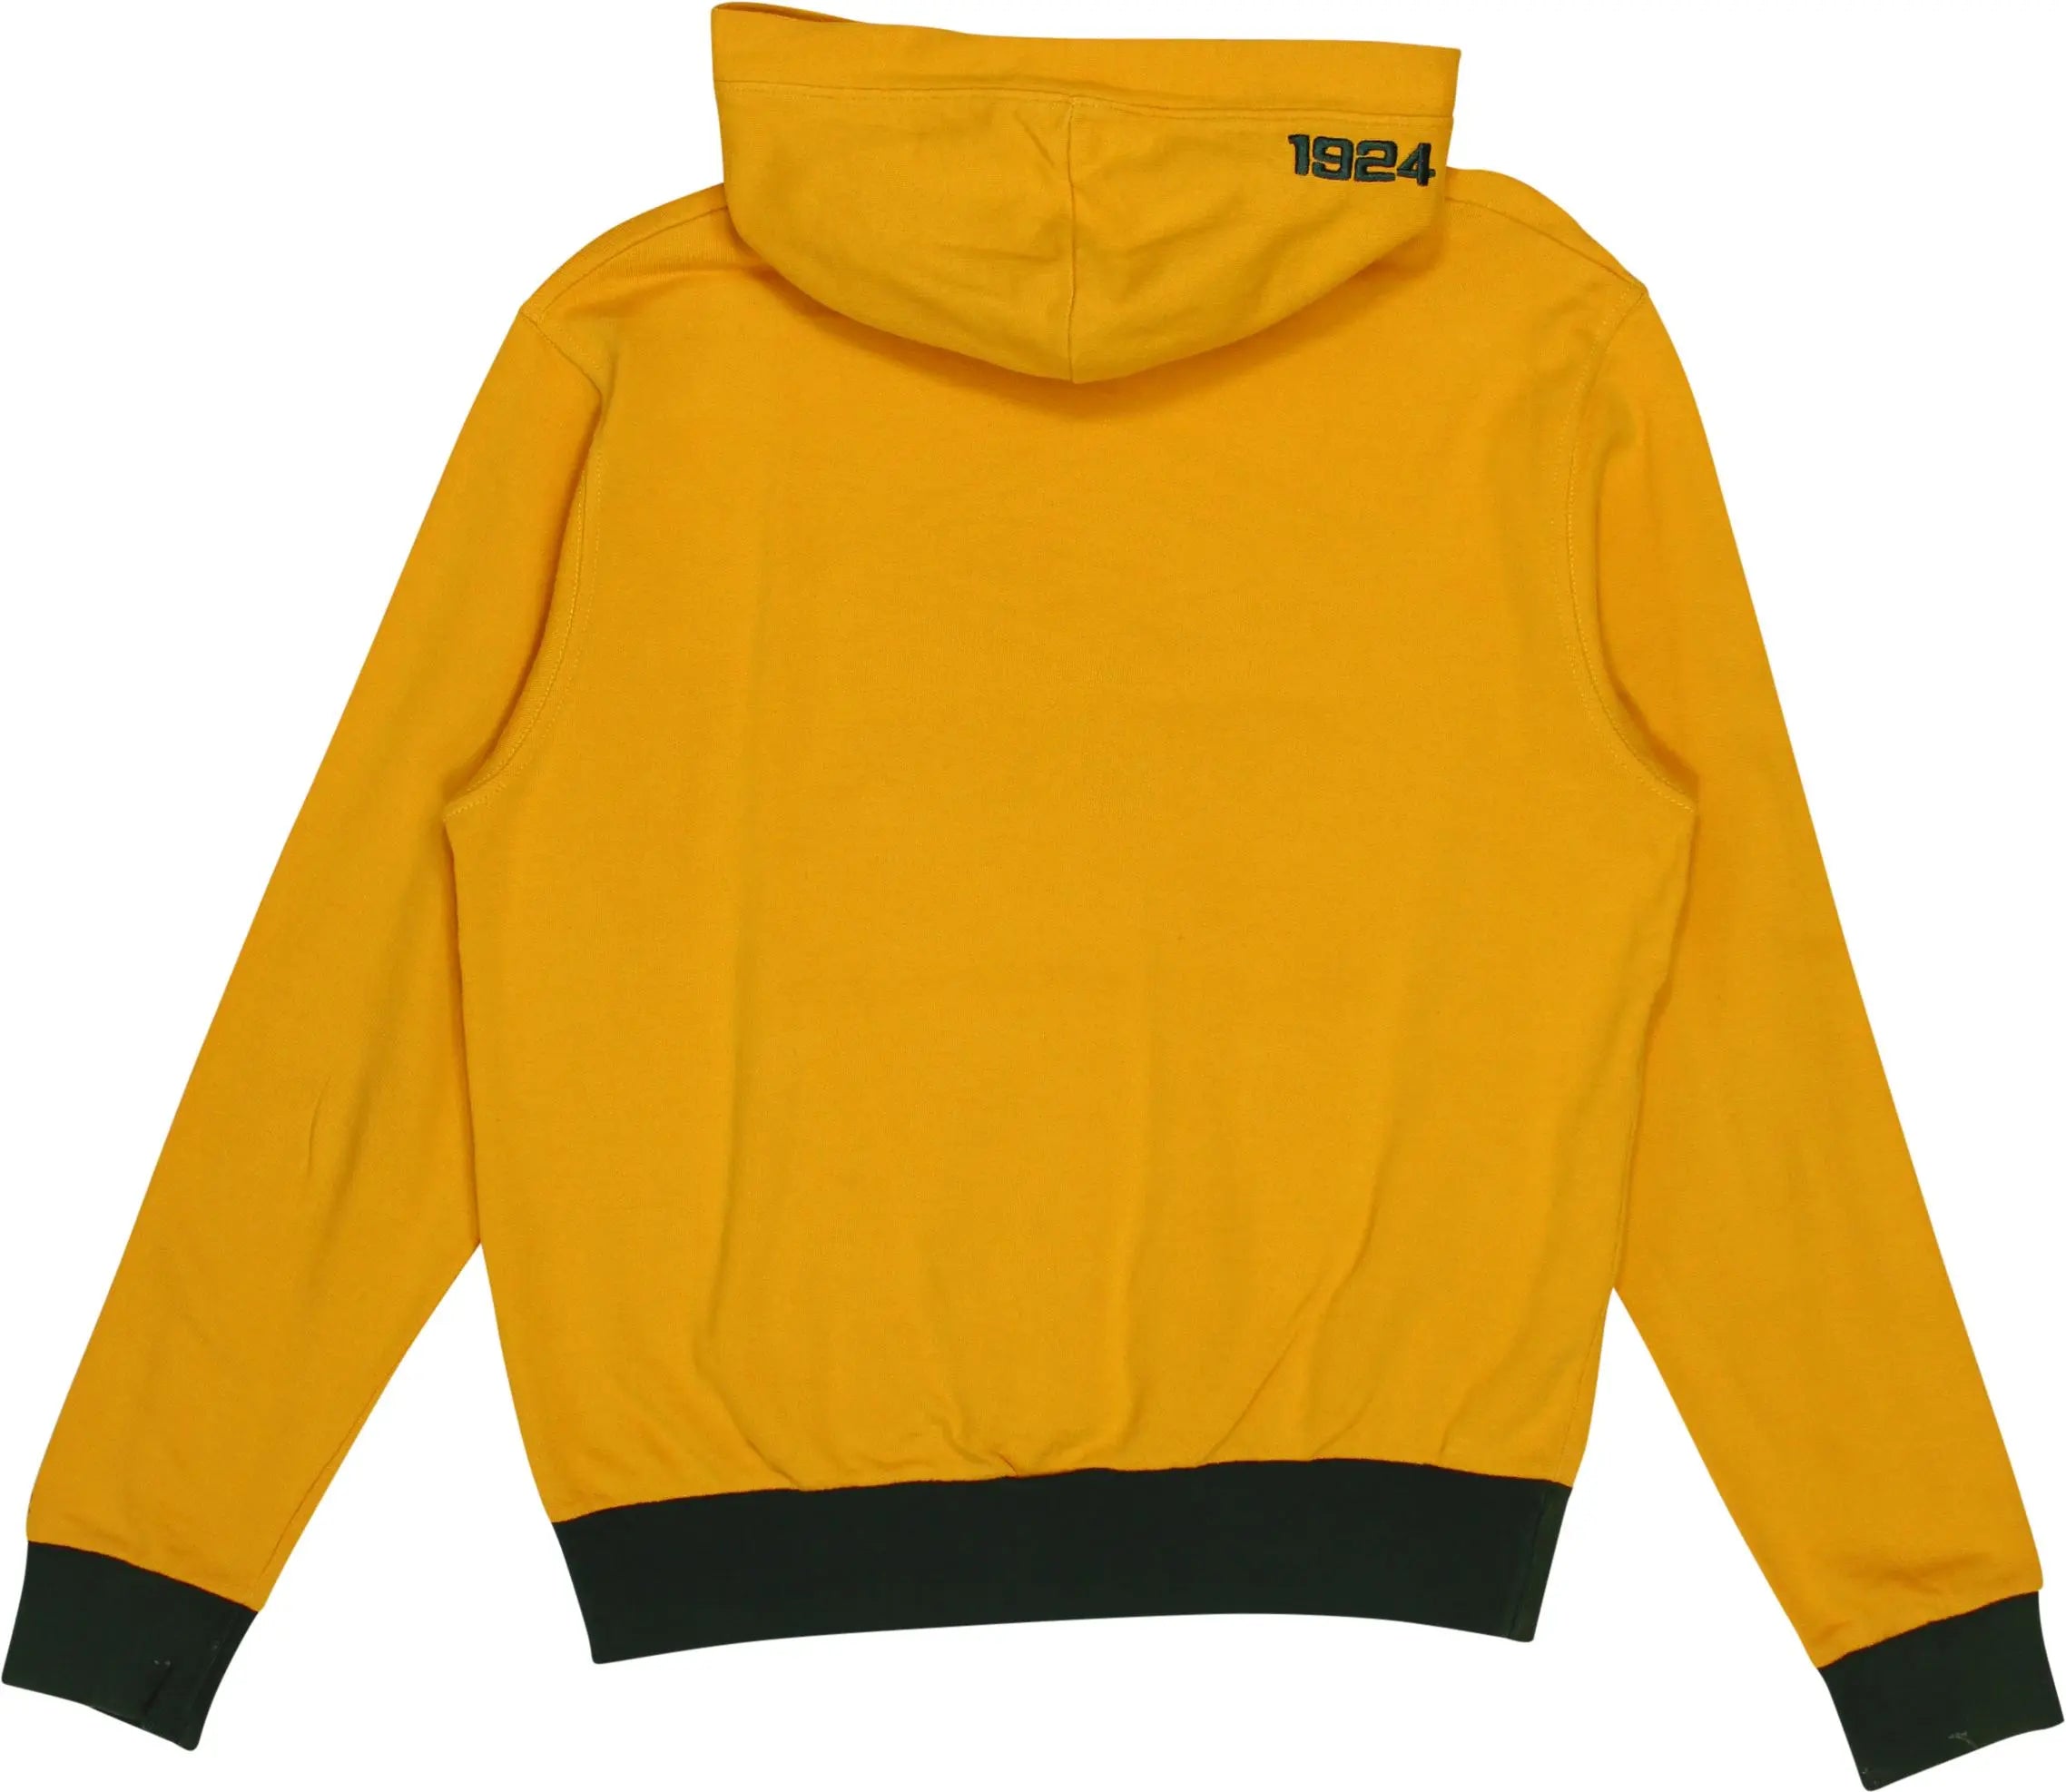 Umbro - Yellow Hoodie by Umbro- ThriftTale.com - Vintage and second handclothing